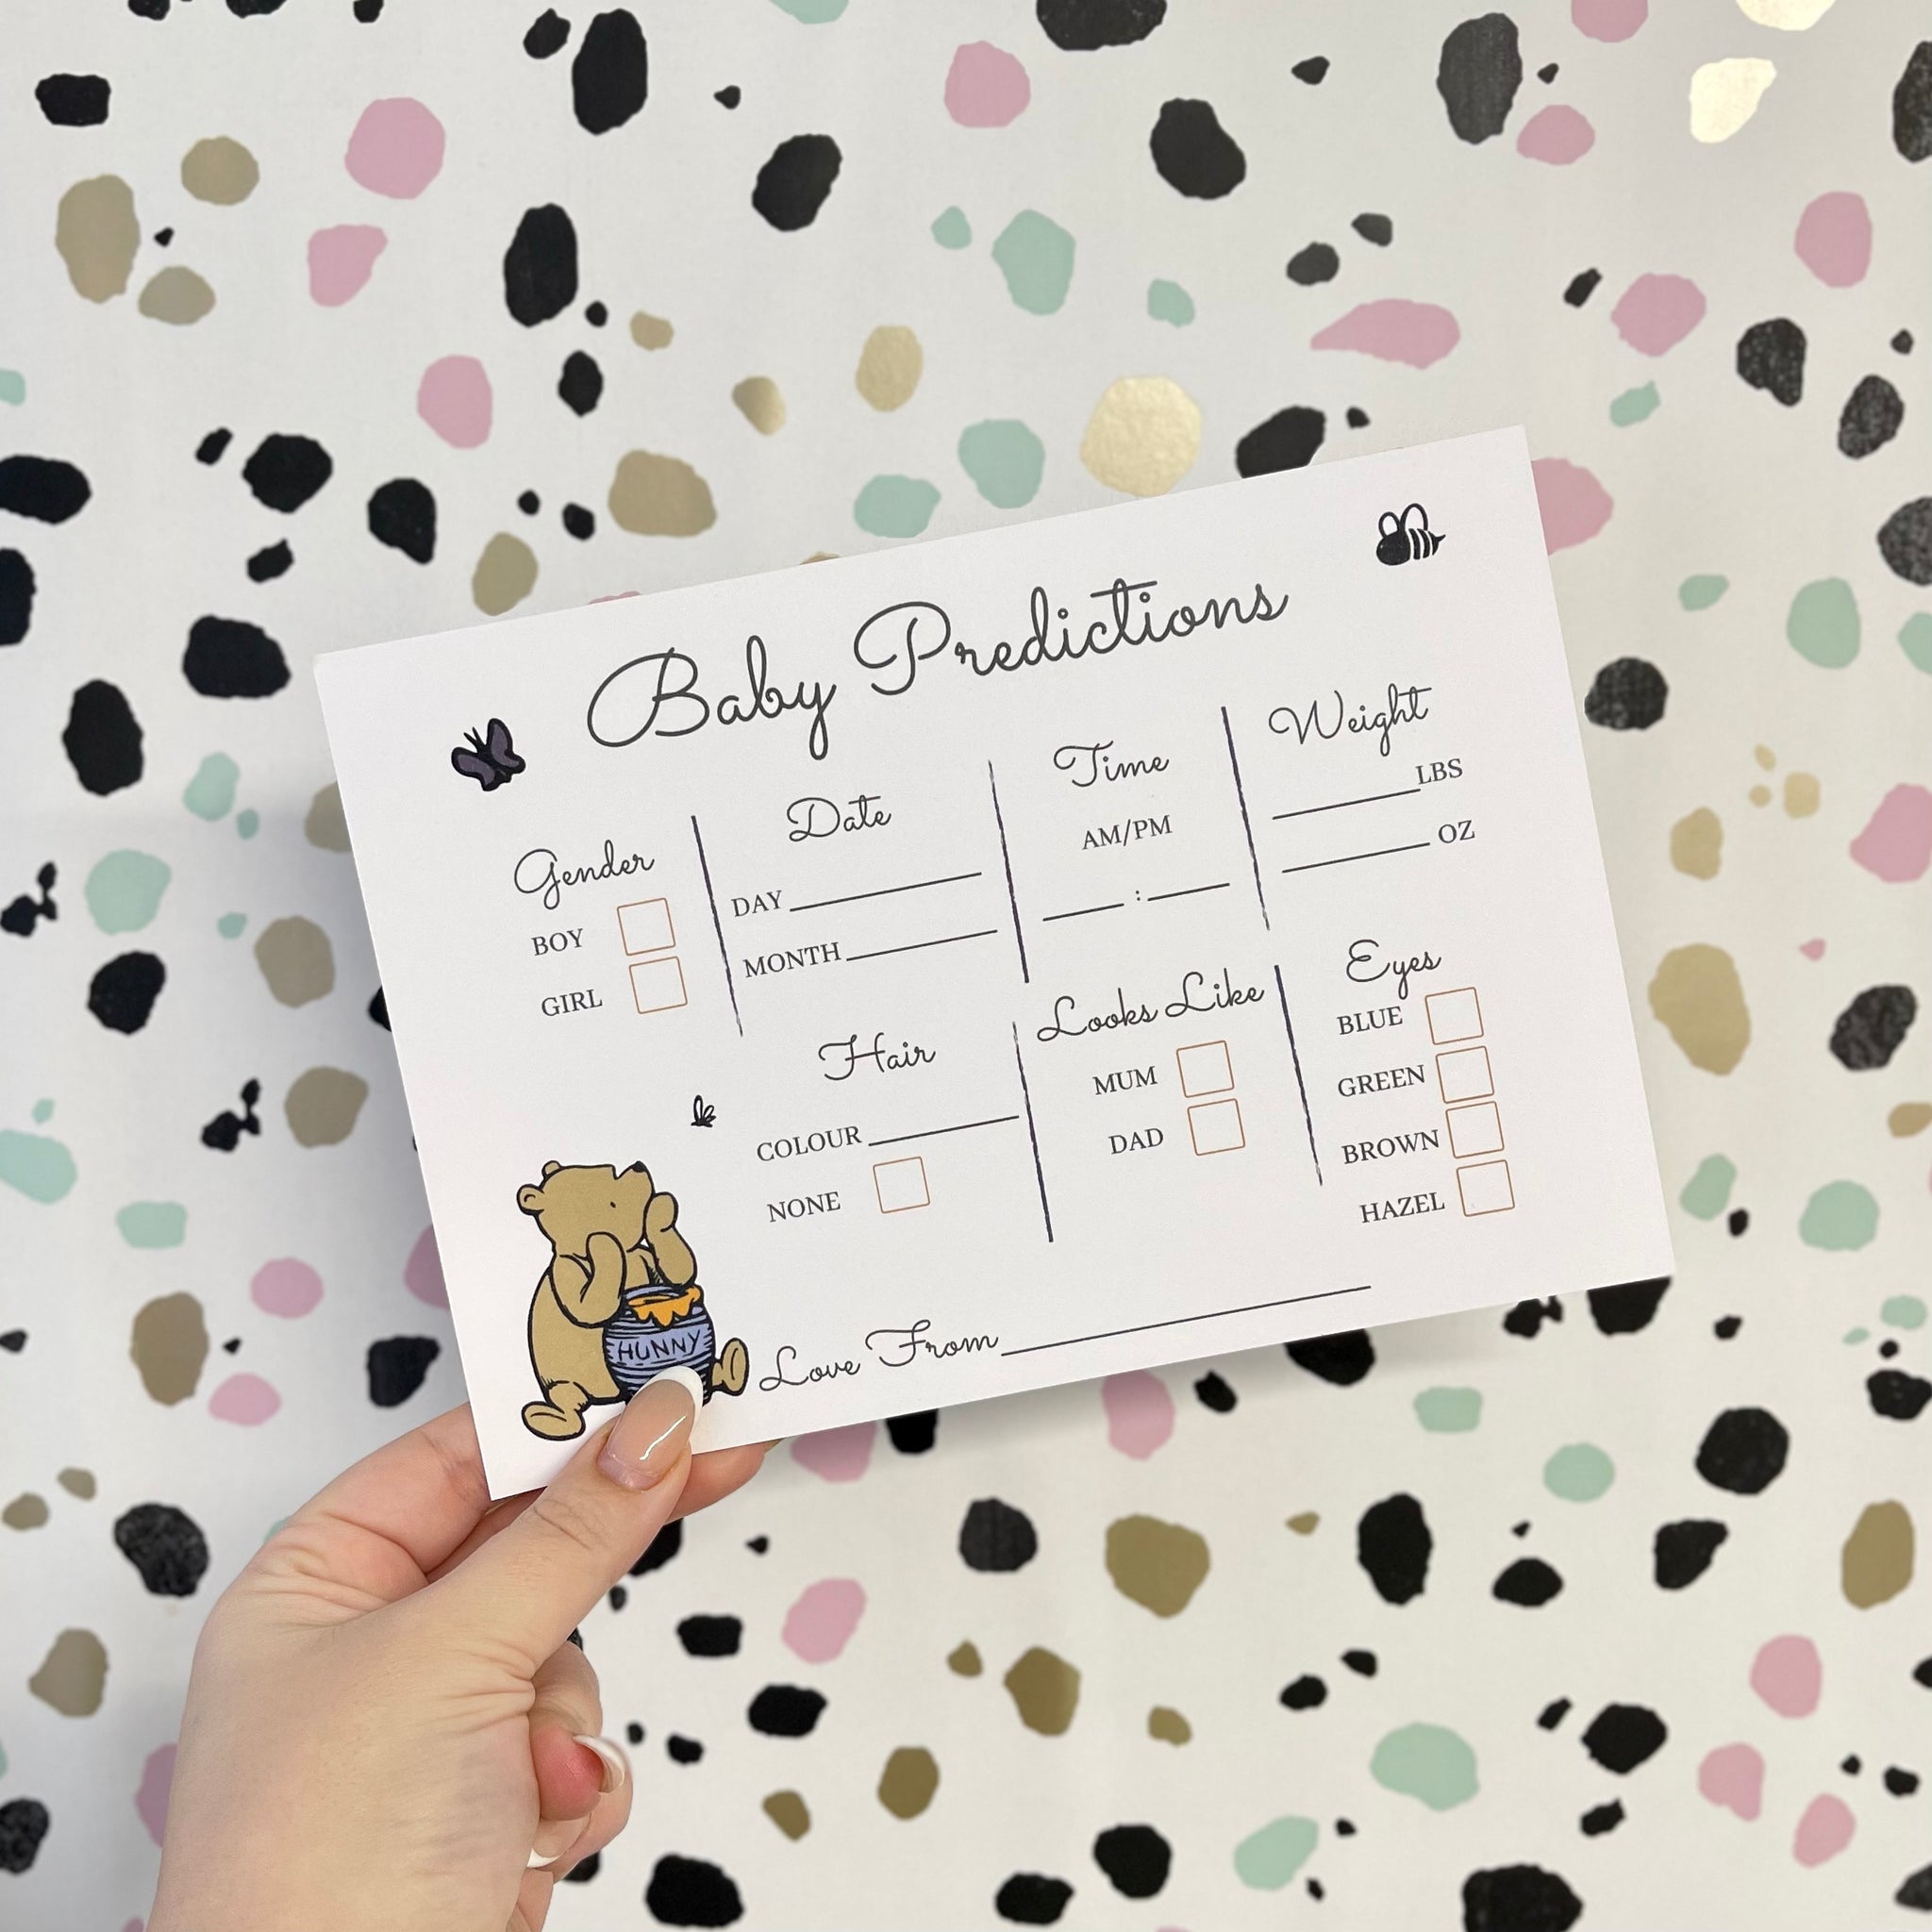 Winnie the Pooh Baby Shower Prediction cards